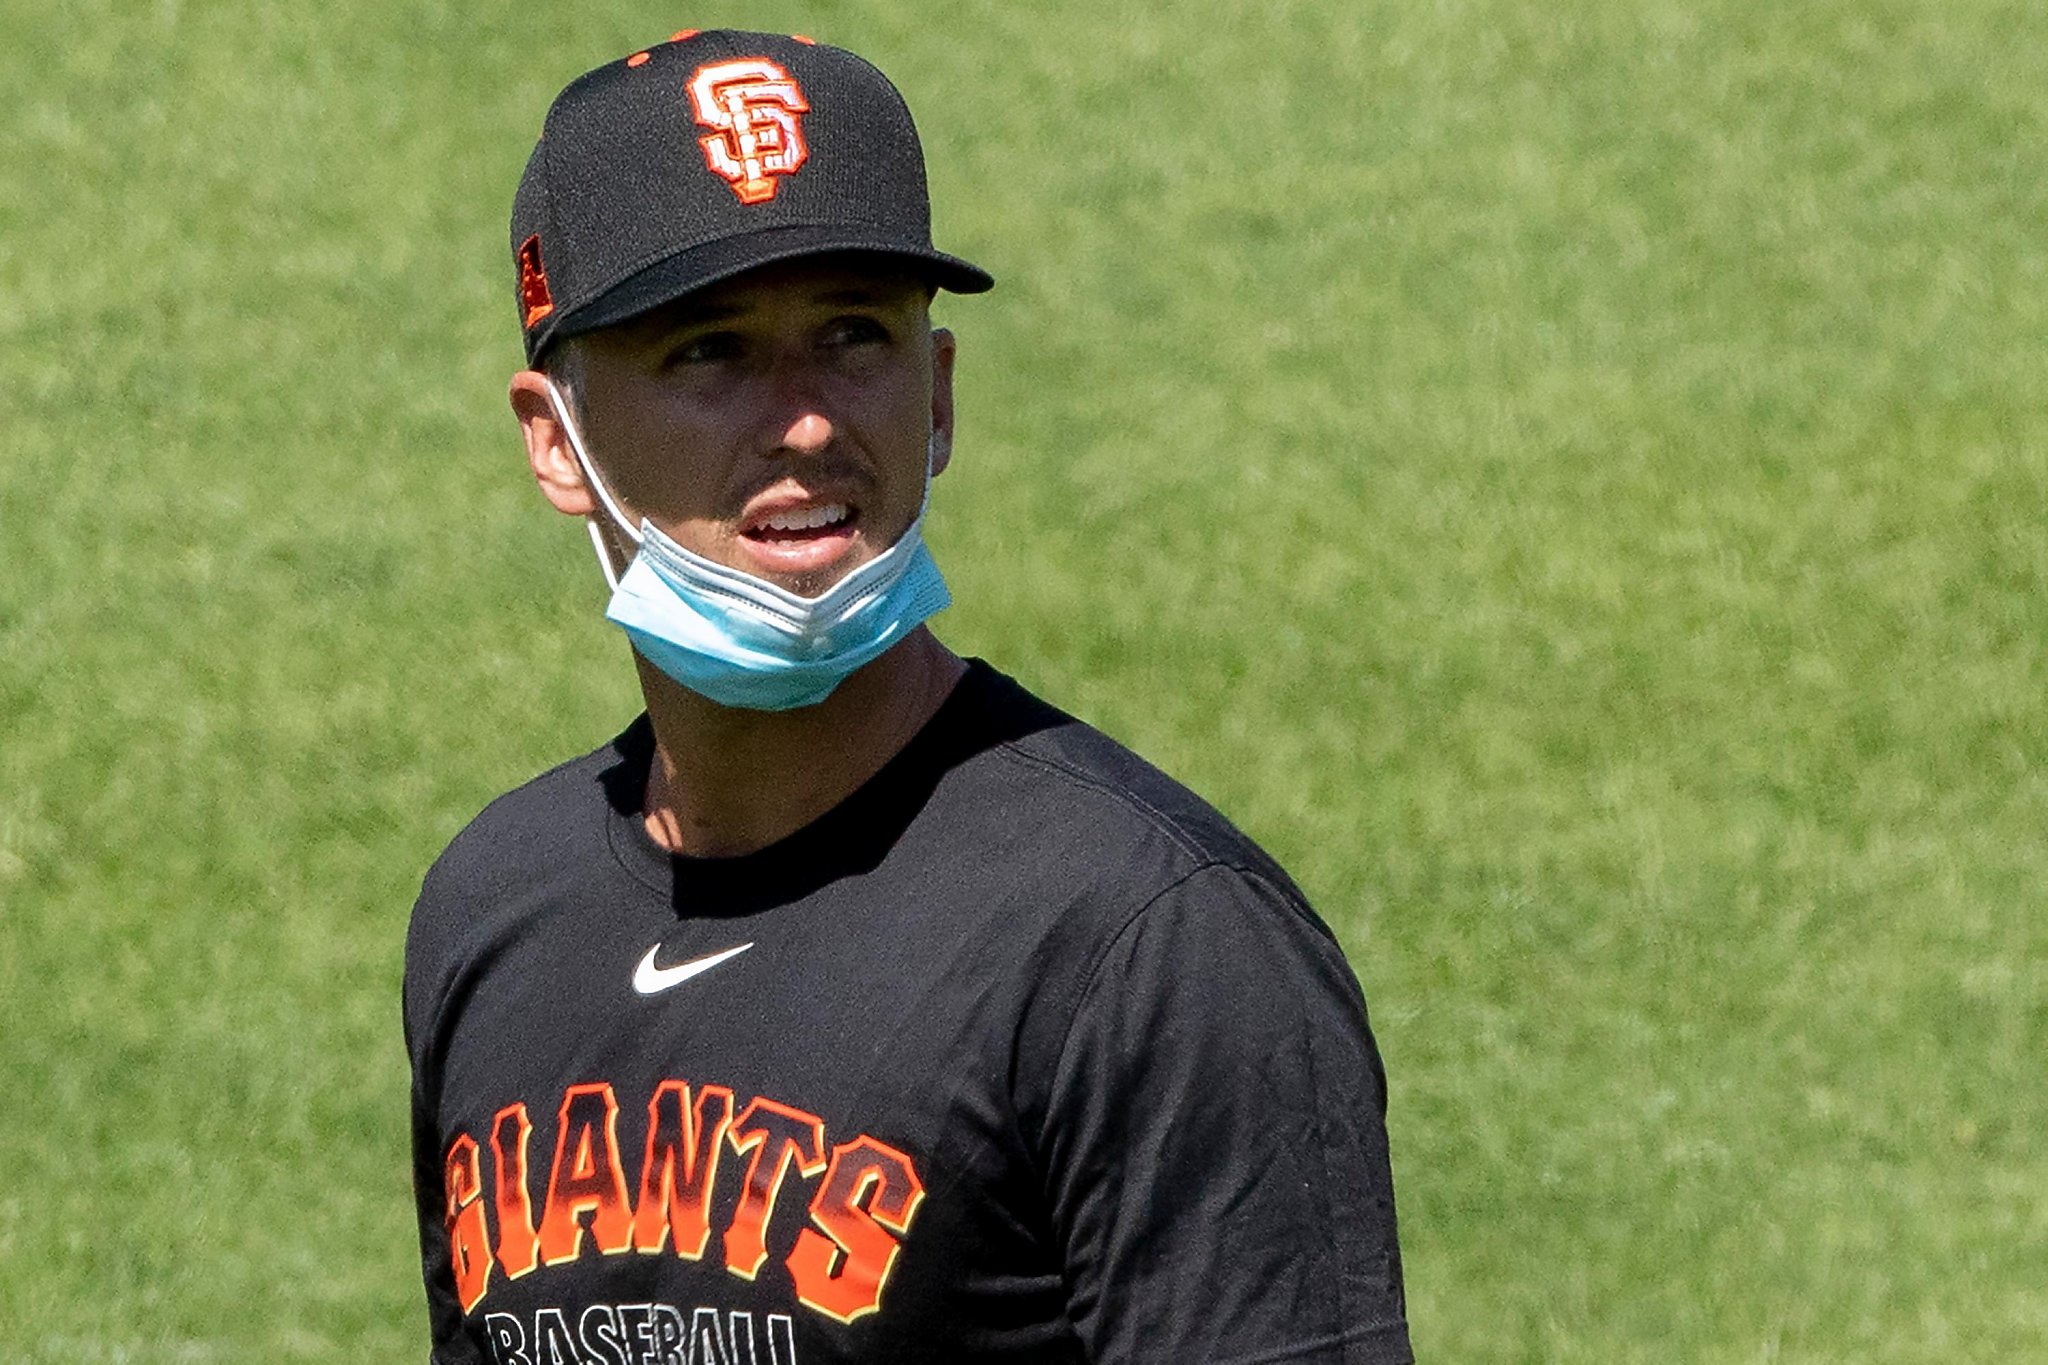 SF Giants pull out all the stops to honor Buster Posey